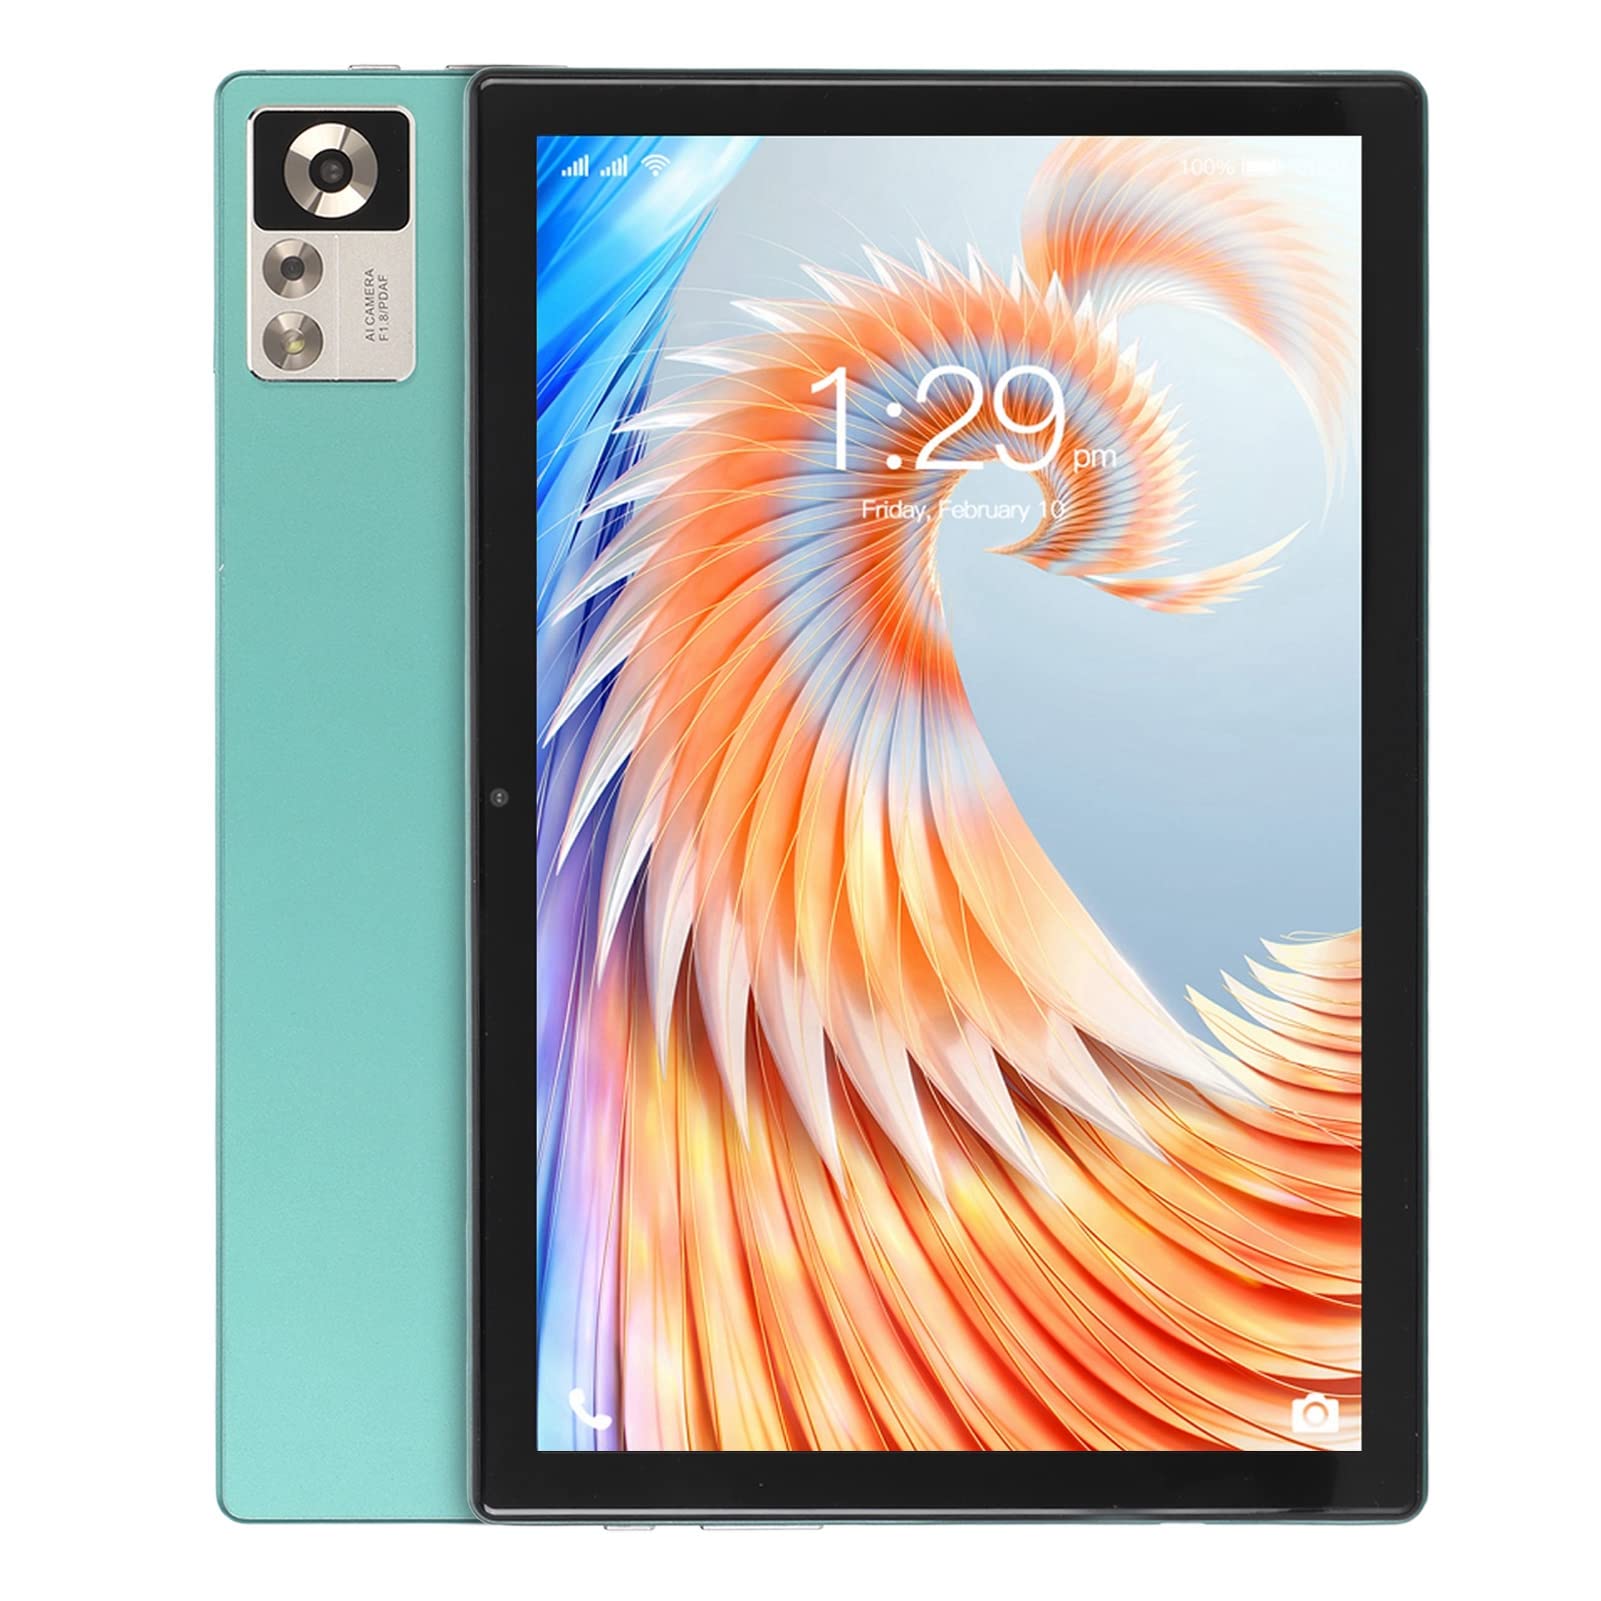 Zunate WiFi Tablet 10.1Inch, Android 12 Tablet with 8GB RAM 256GB ROM, 710 Octa Core Processor Tablets, 8MP 16MP Dual Camera, 7000mAh Battery, IPS HD Touch Screen